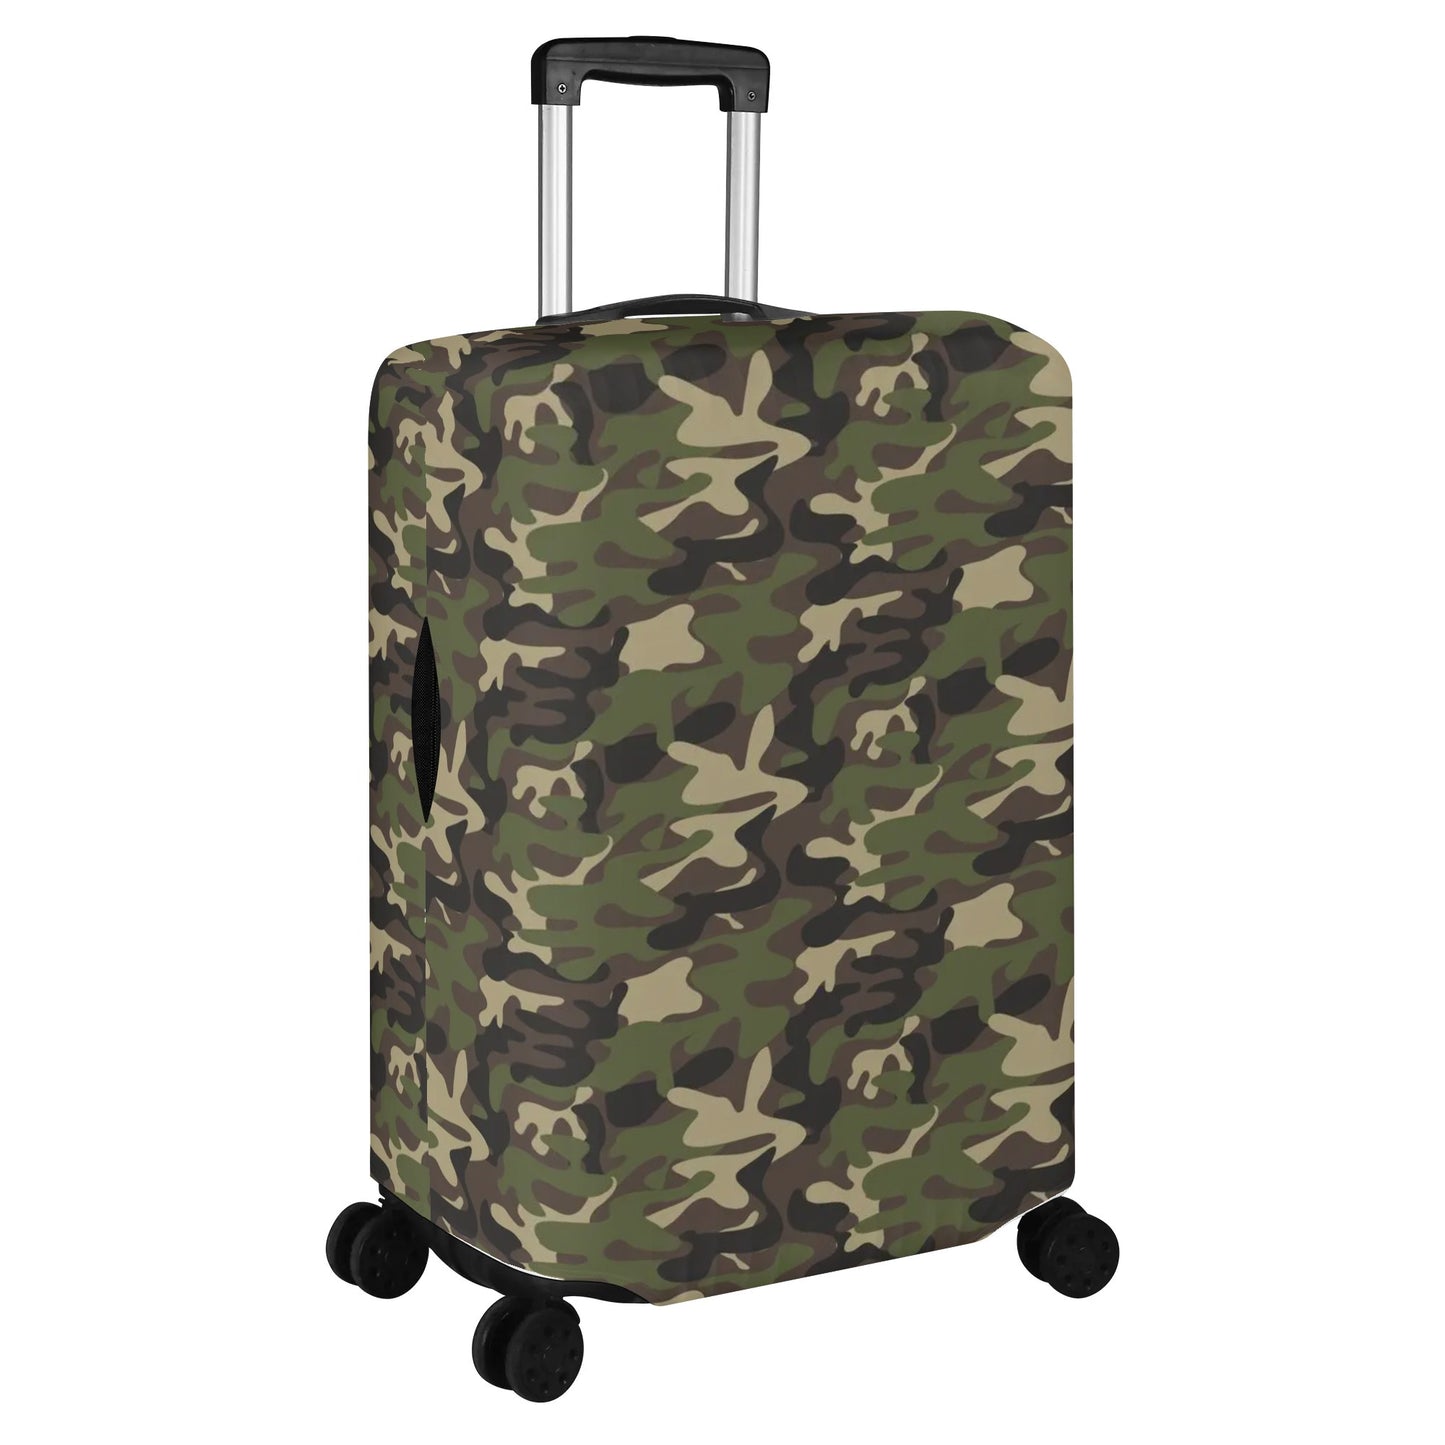 Camo Luggage Cover, Green Camouflage Suitcase Protector Hard Carry On Bag Washable Wrap Large Small Travel Aesthetic Zipper Sleeve